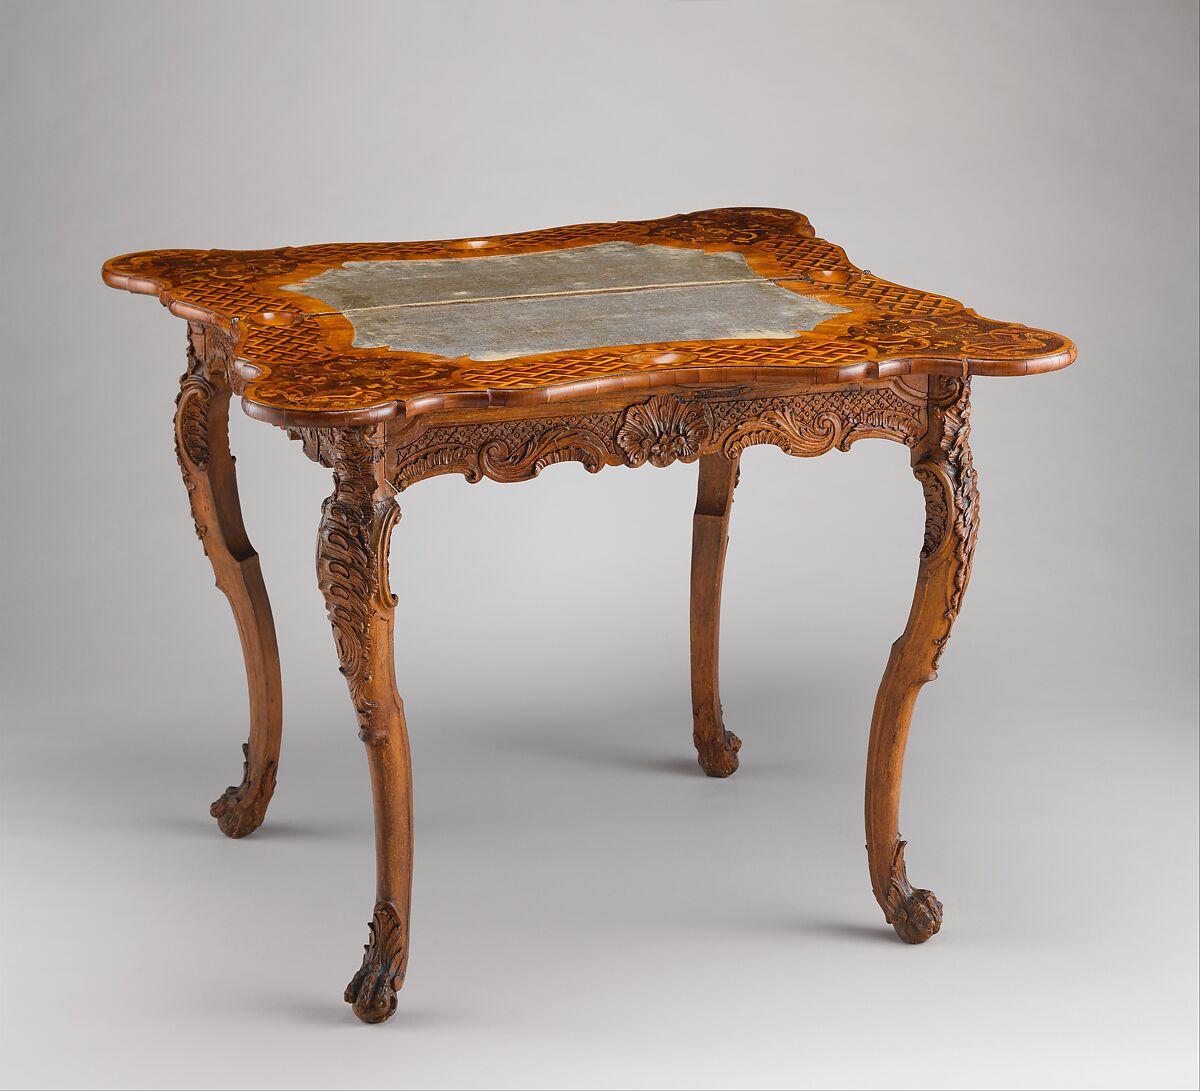 Card table, Carved walnut frame; pine top with marquetry of walnut, figured walnut, boxwood, alder burl, birch, olive wood, plum, padauk wood, yew, green-stained poplar, and other marquetry woods; lined with modern velvet; iron fittings, German, Bamberg 